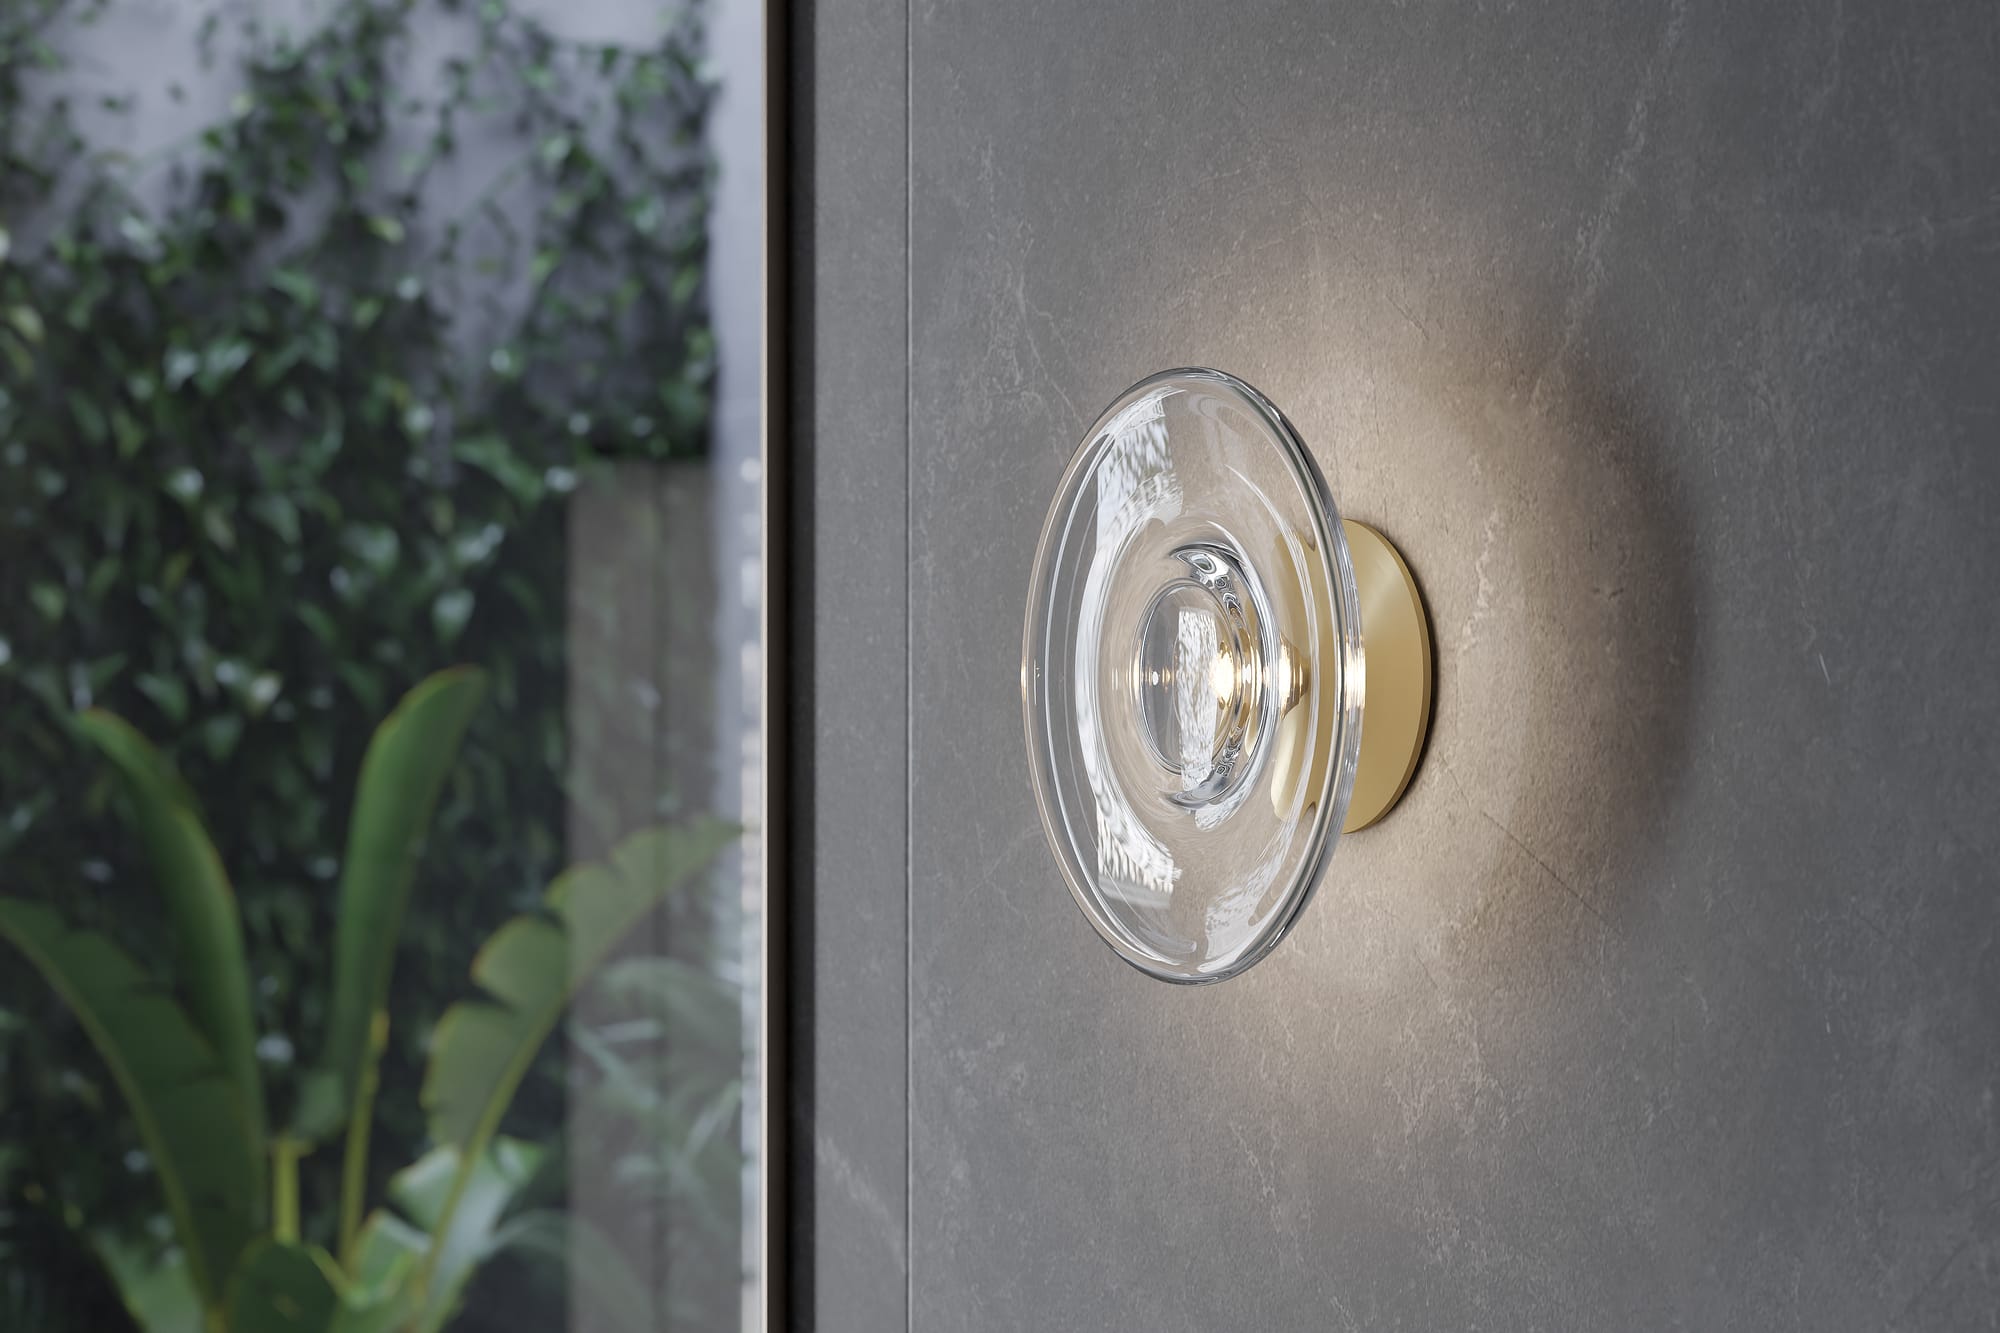 Sol Round Wall Light by SOKTAS. Copyright of SOKTAS. Closeup of glass and gold wall sconce on tiled bathroom wall. 